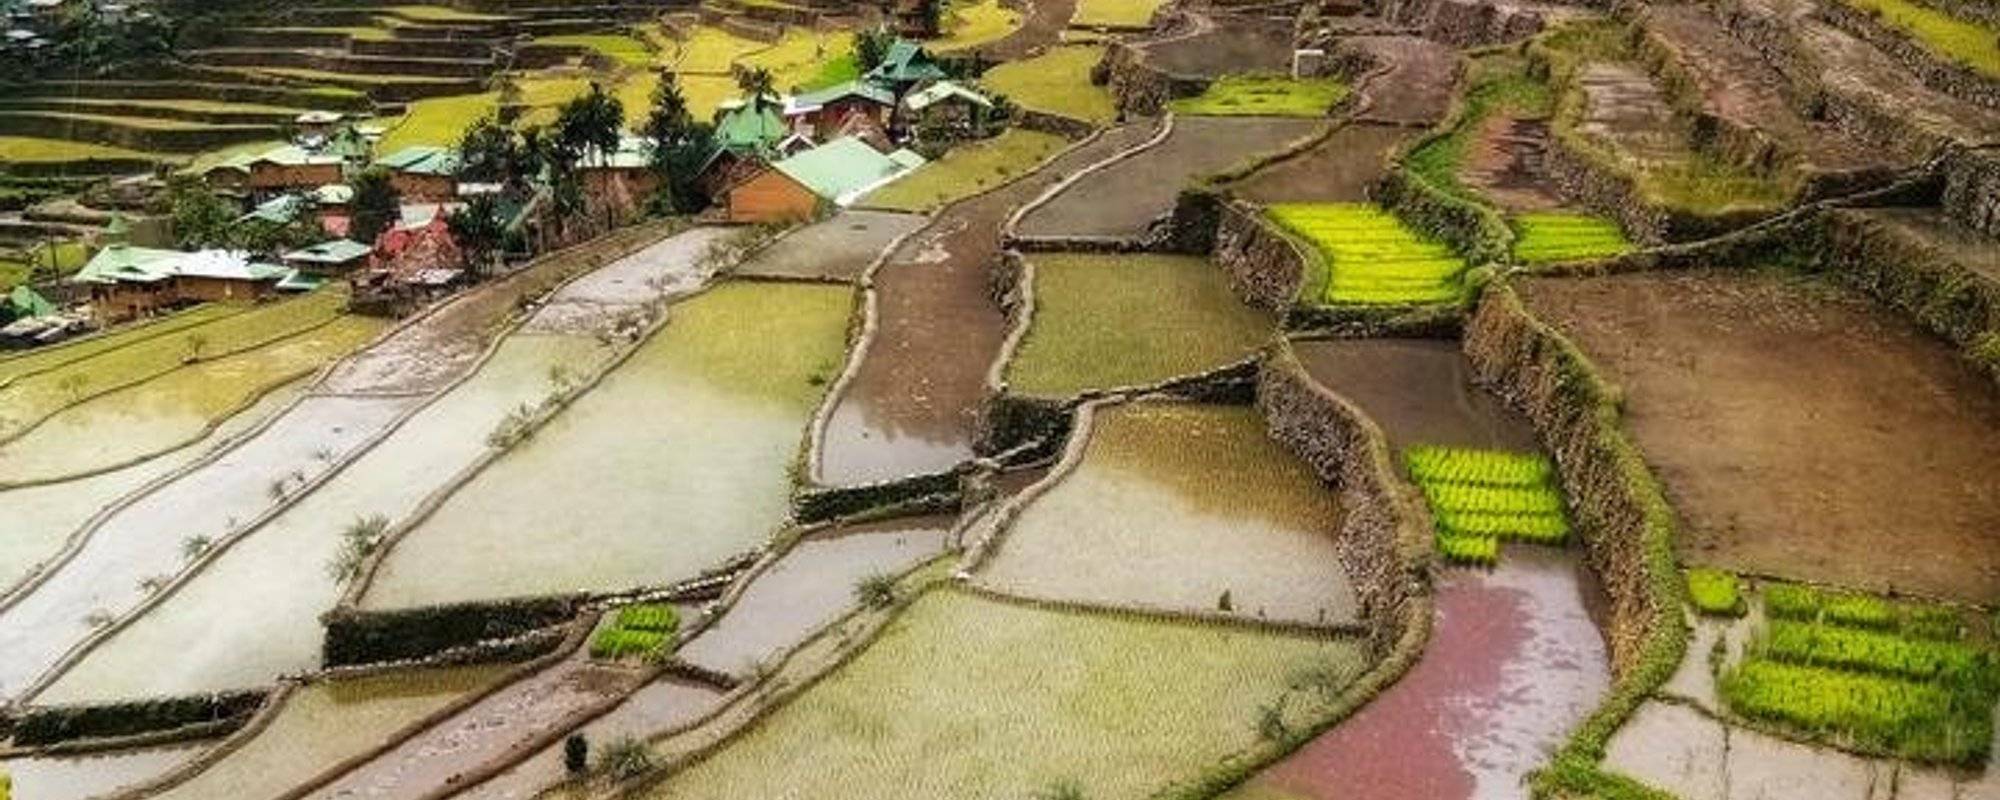 Batad's Rice Terraces and Tappia Waterfalls (with video clips)